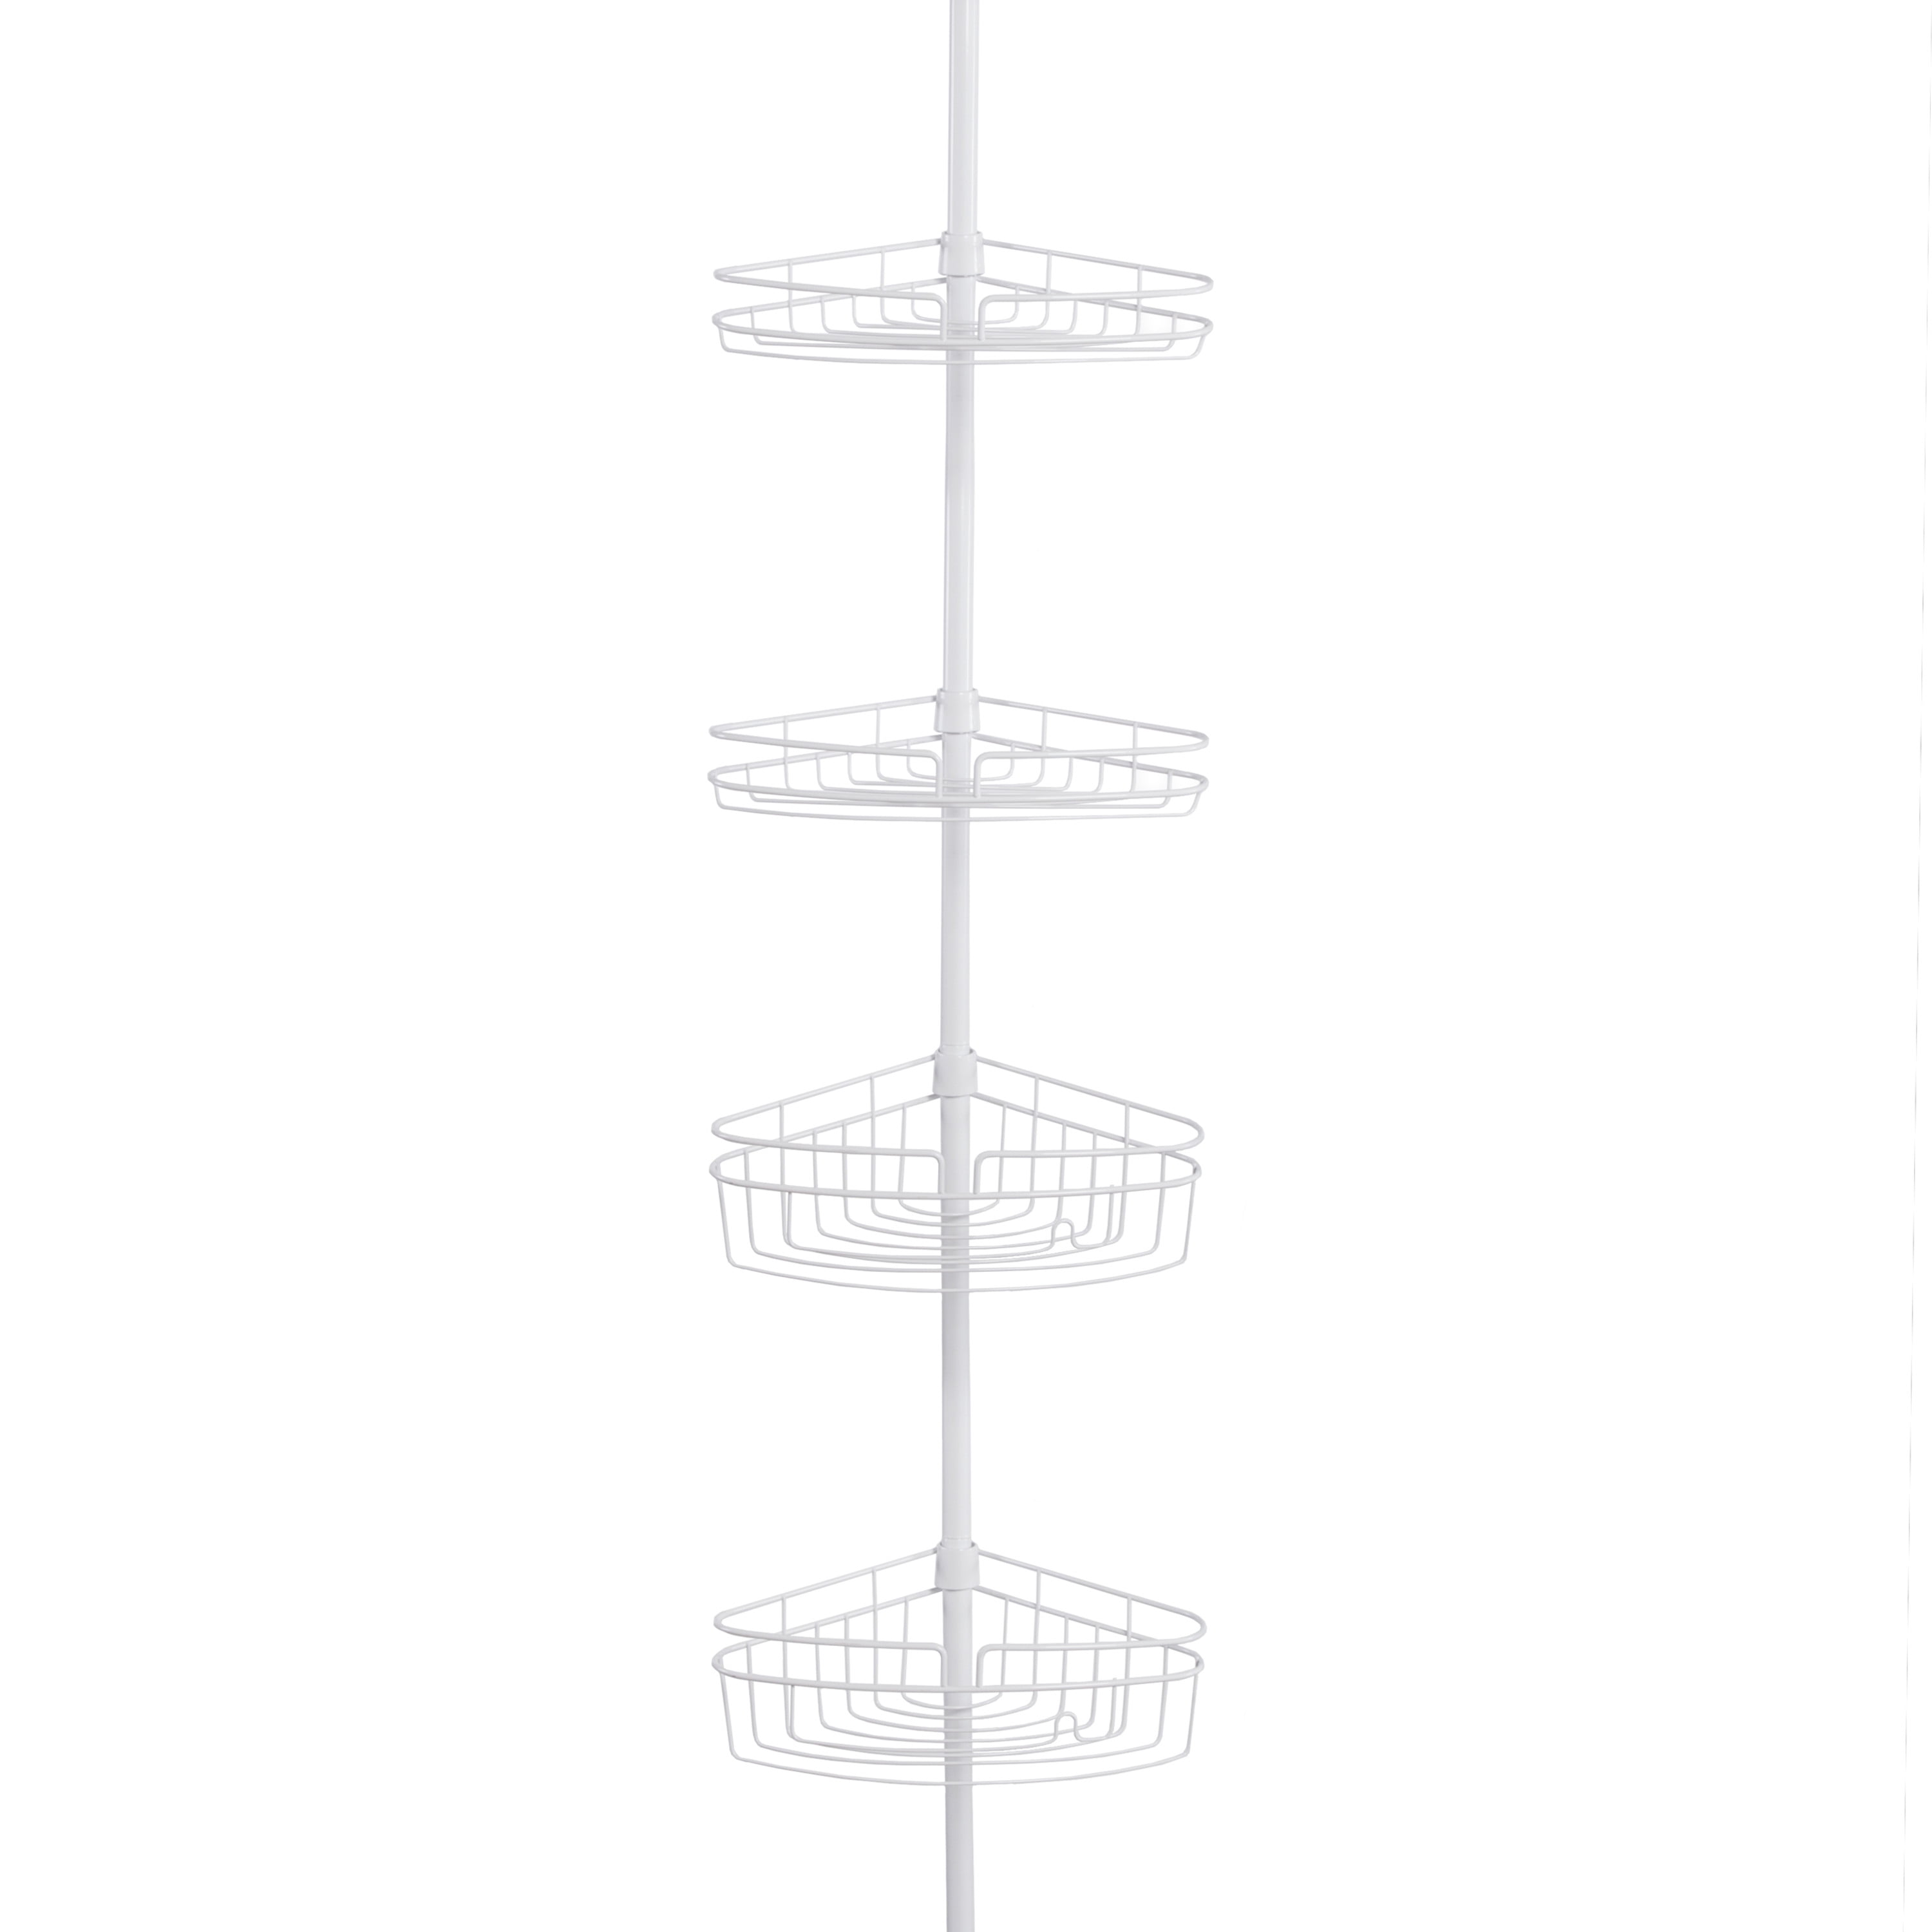 Chrome-plated 4-tier Tension Pole Corner Shower Caddy - Bed Bath & Beyond -  11408275